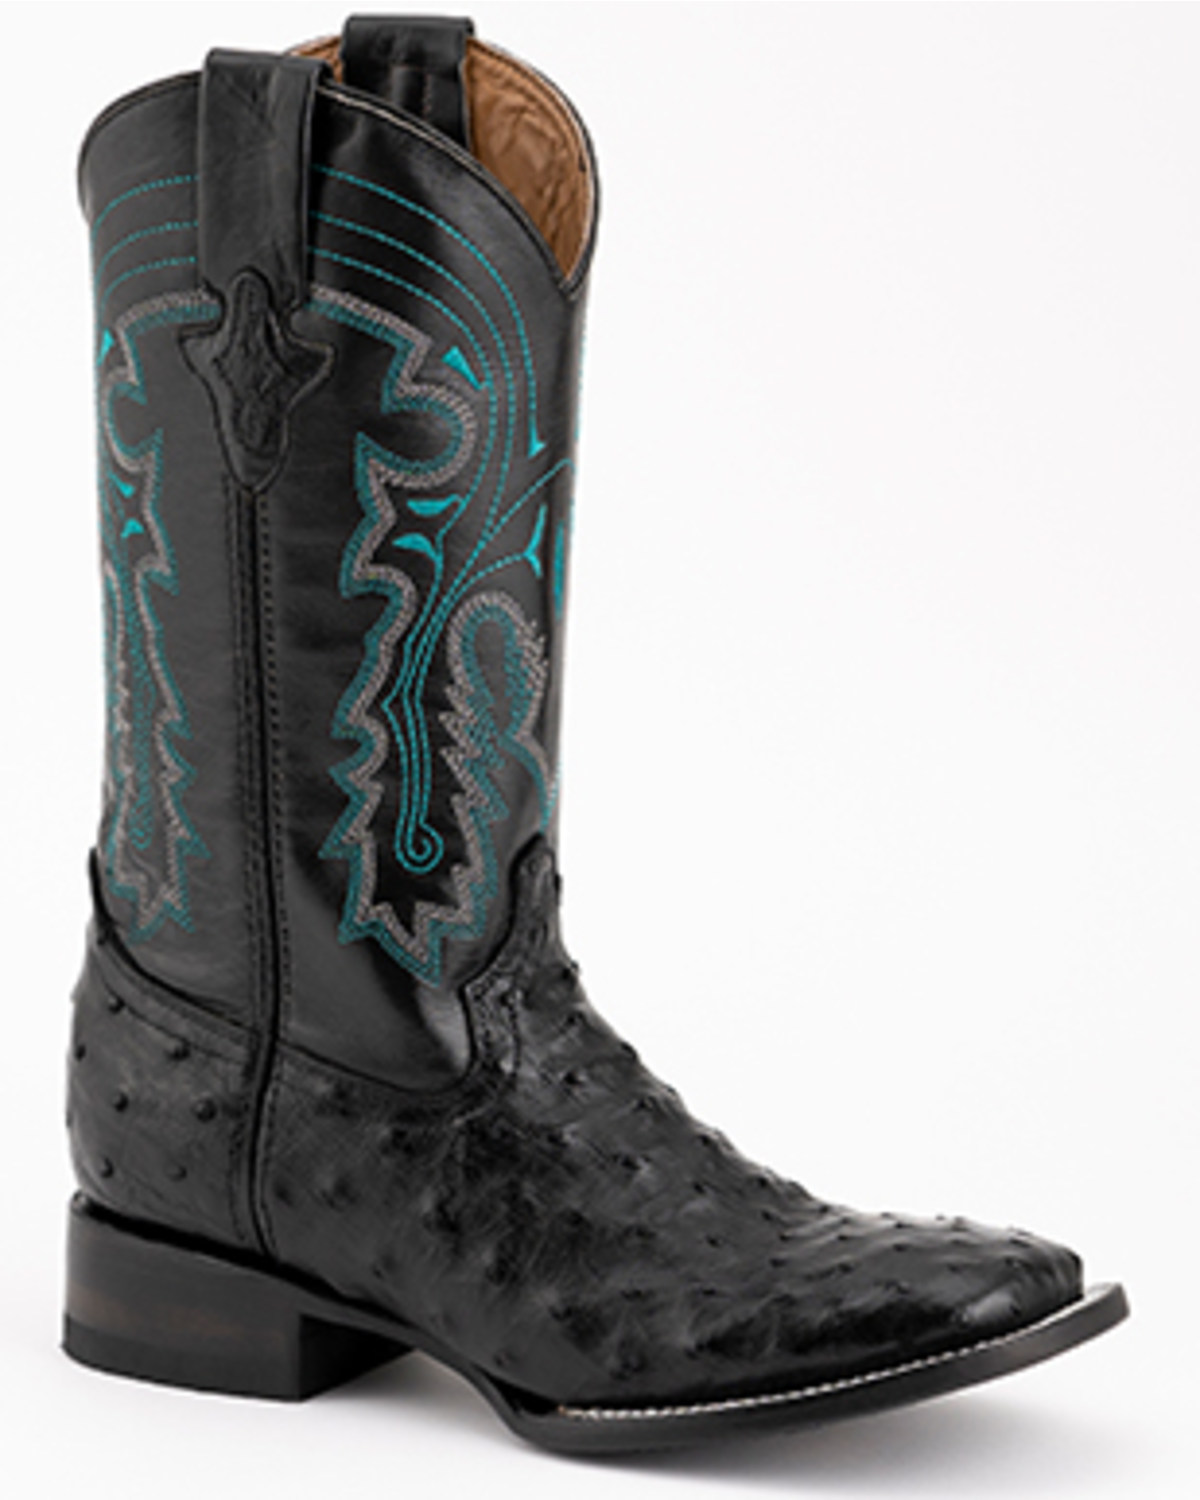 Ferrini Men's Full-Quill Ostrich Embroidered Western Boots - Broad Square Toe